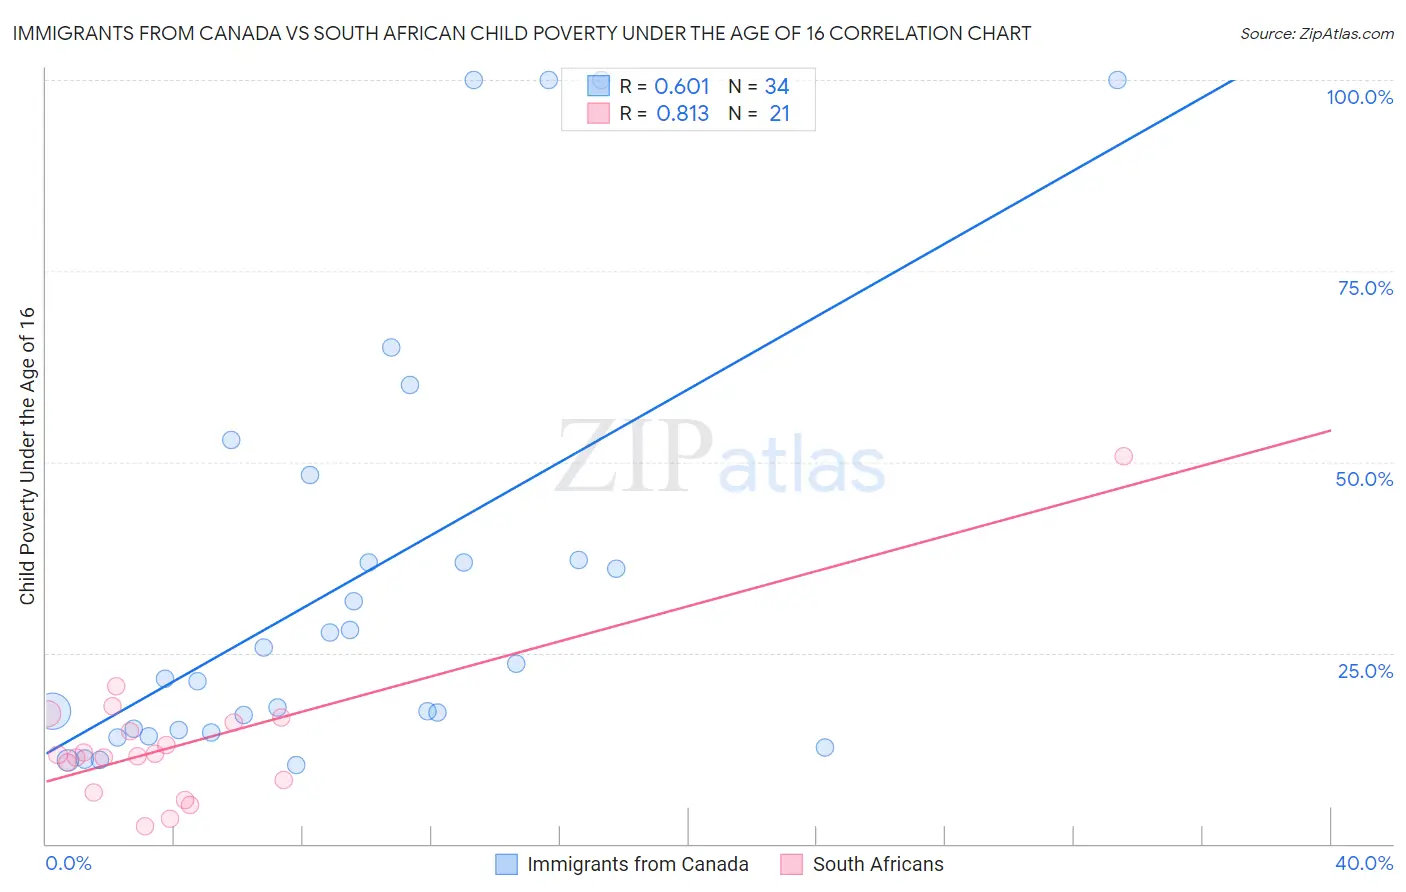 Immigrants from Canada vs South African Child Poverty Under the Age of 16